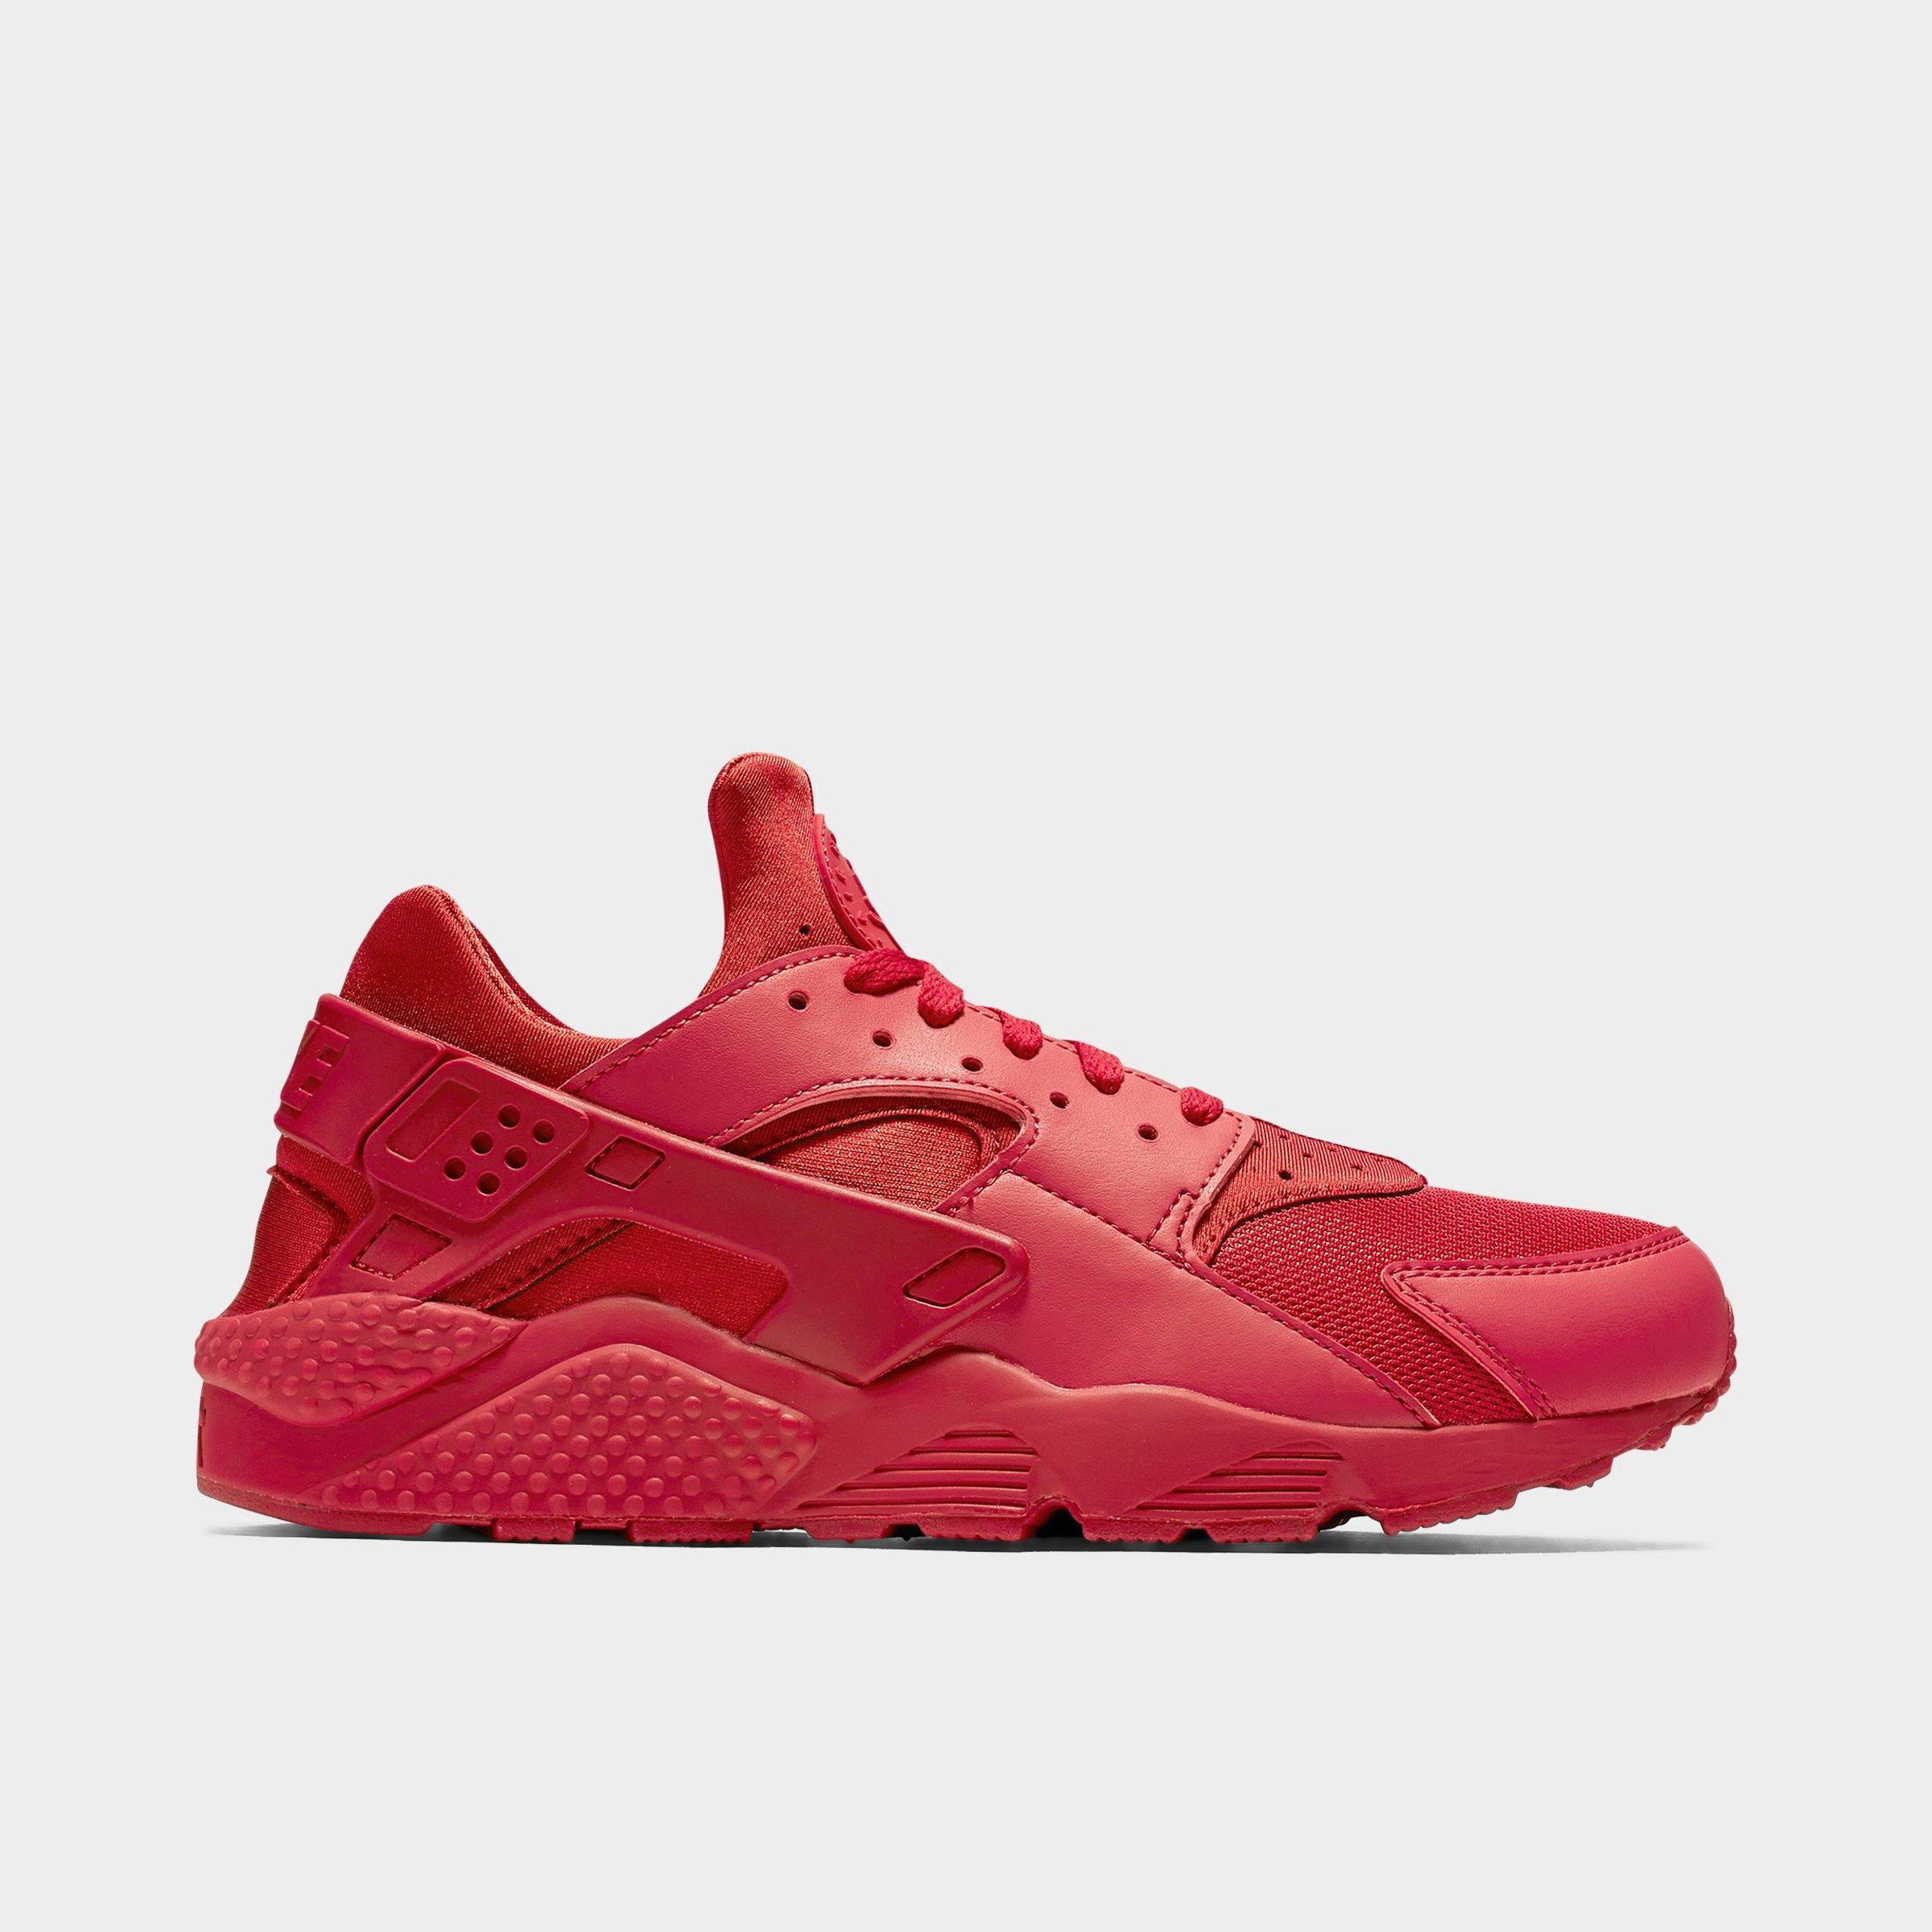 red huaraches finish line cheap online